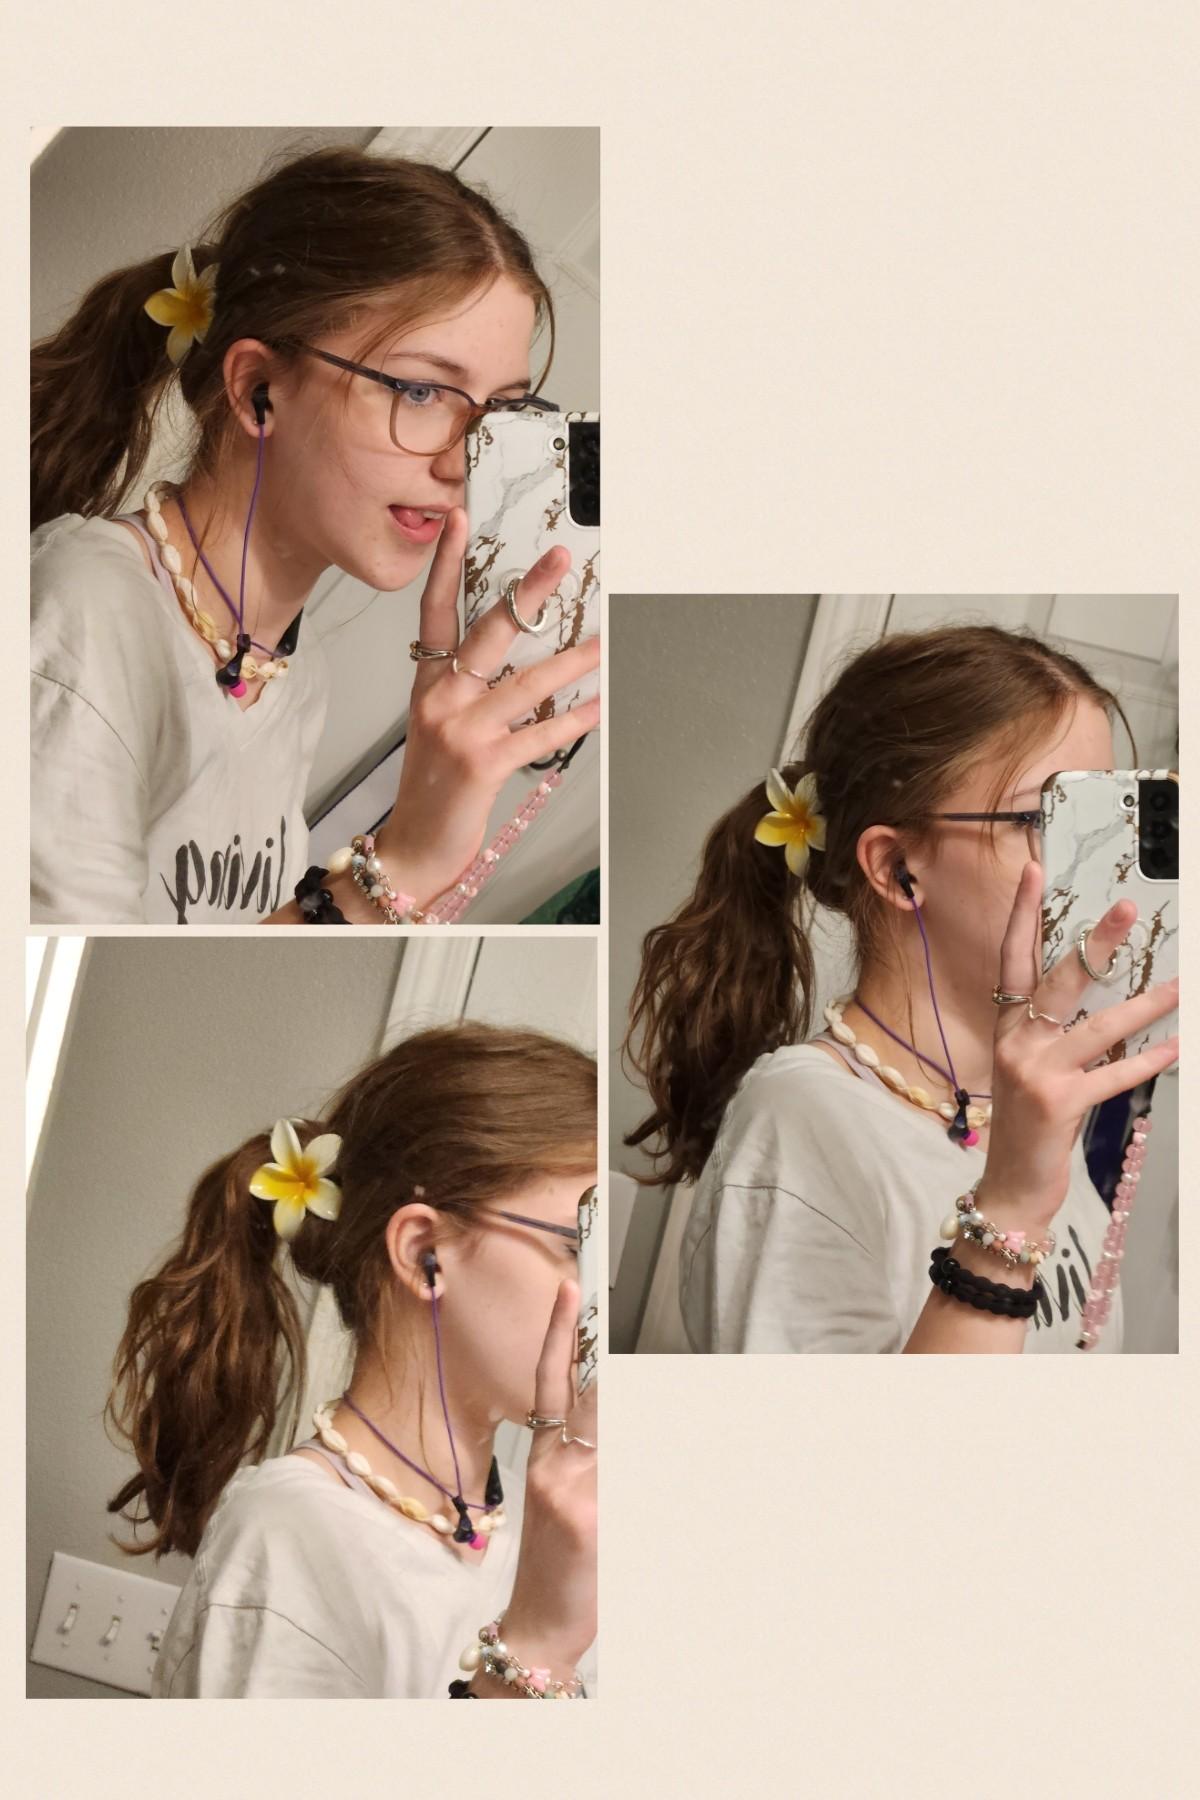 Summer vibess! I got the flower claw clips in different colors, and I love them so much, like AHH they're so cute! 🌺
(4.19.24)